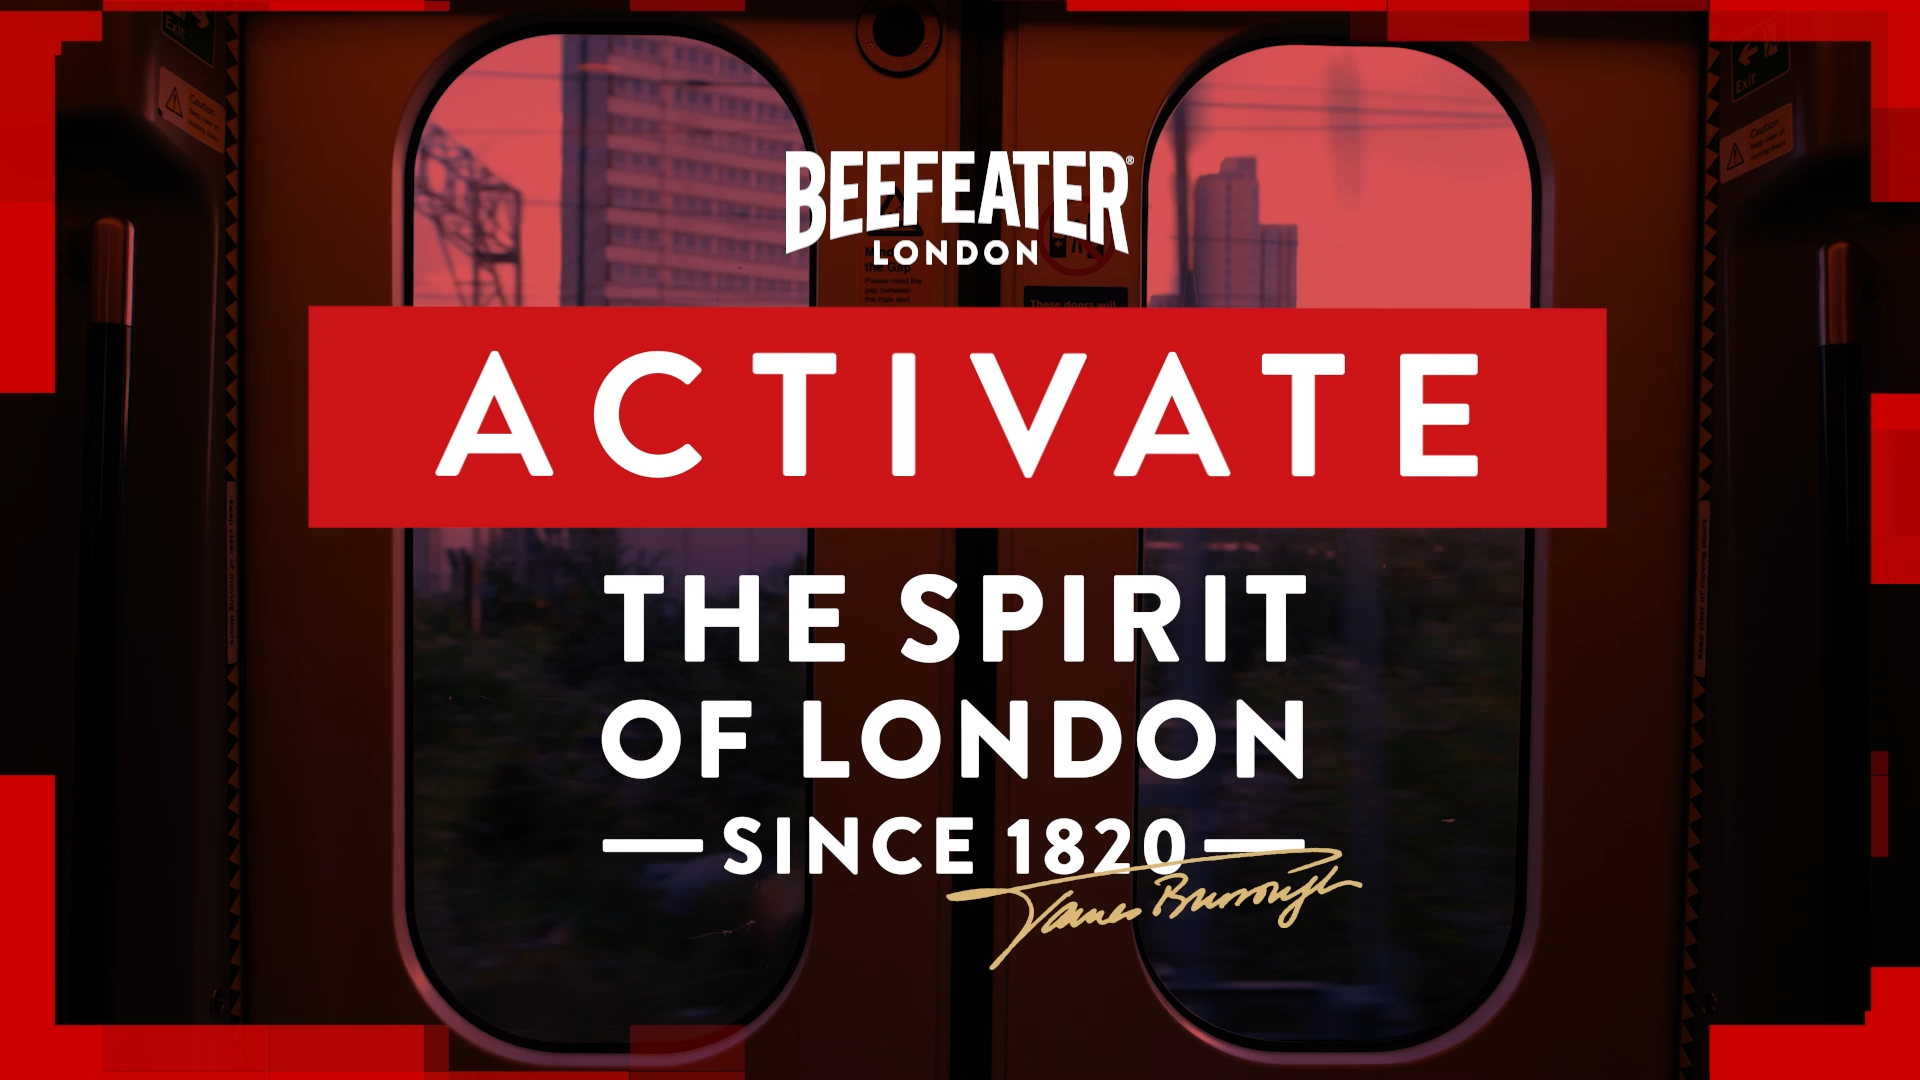 Beefeater AR Experience